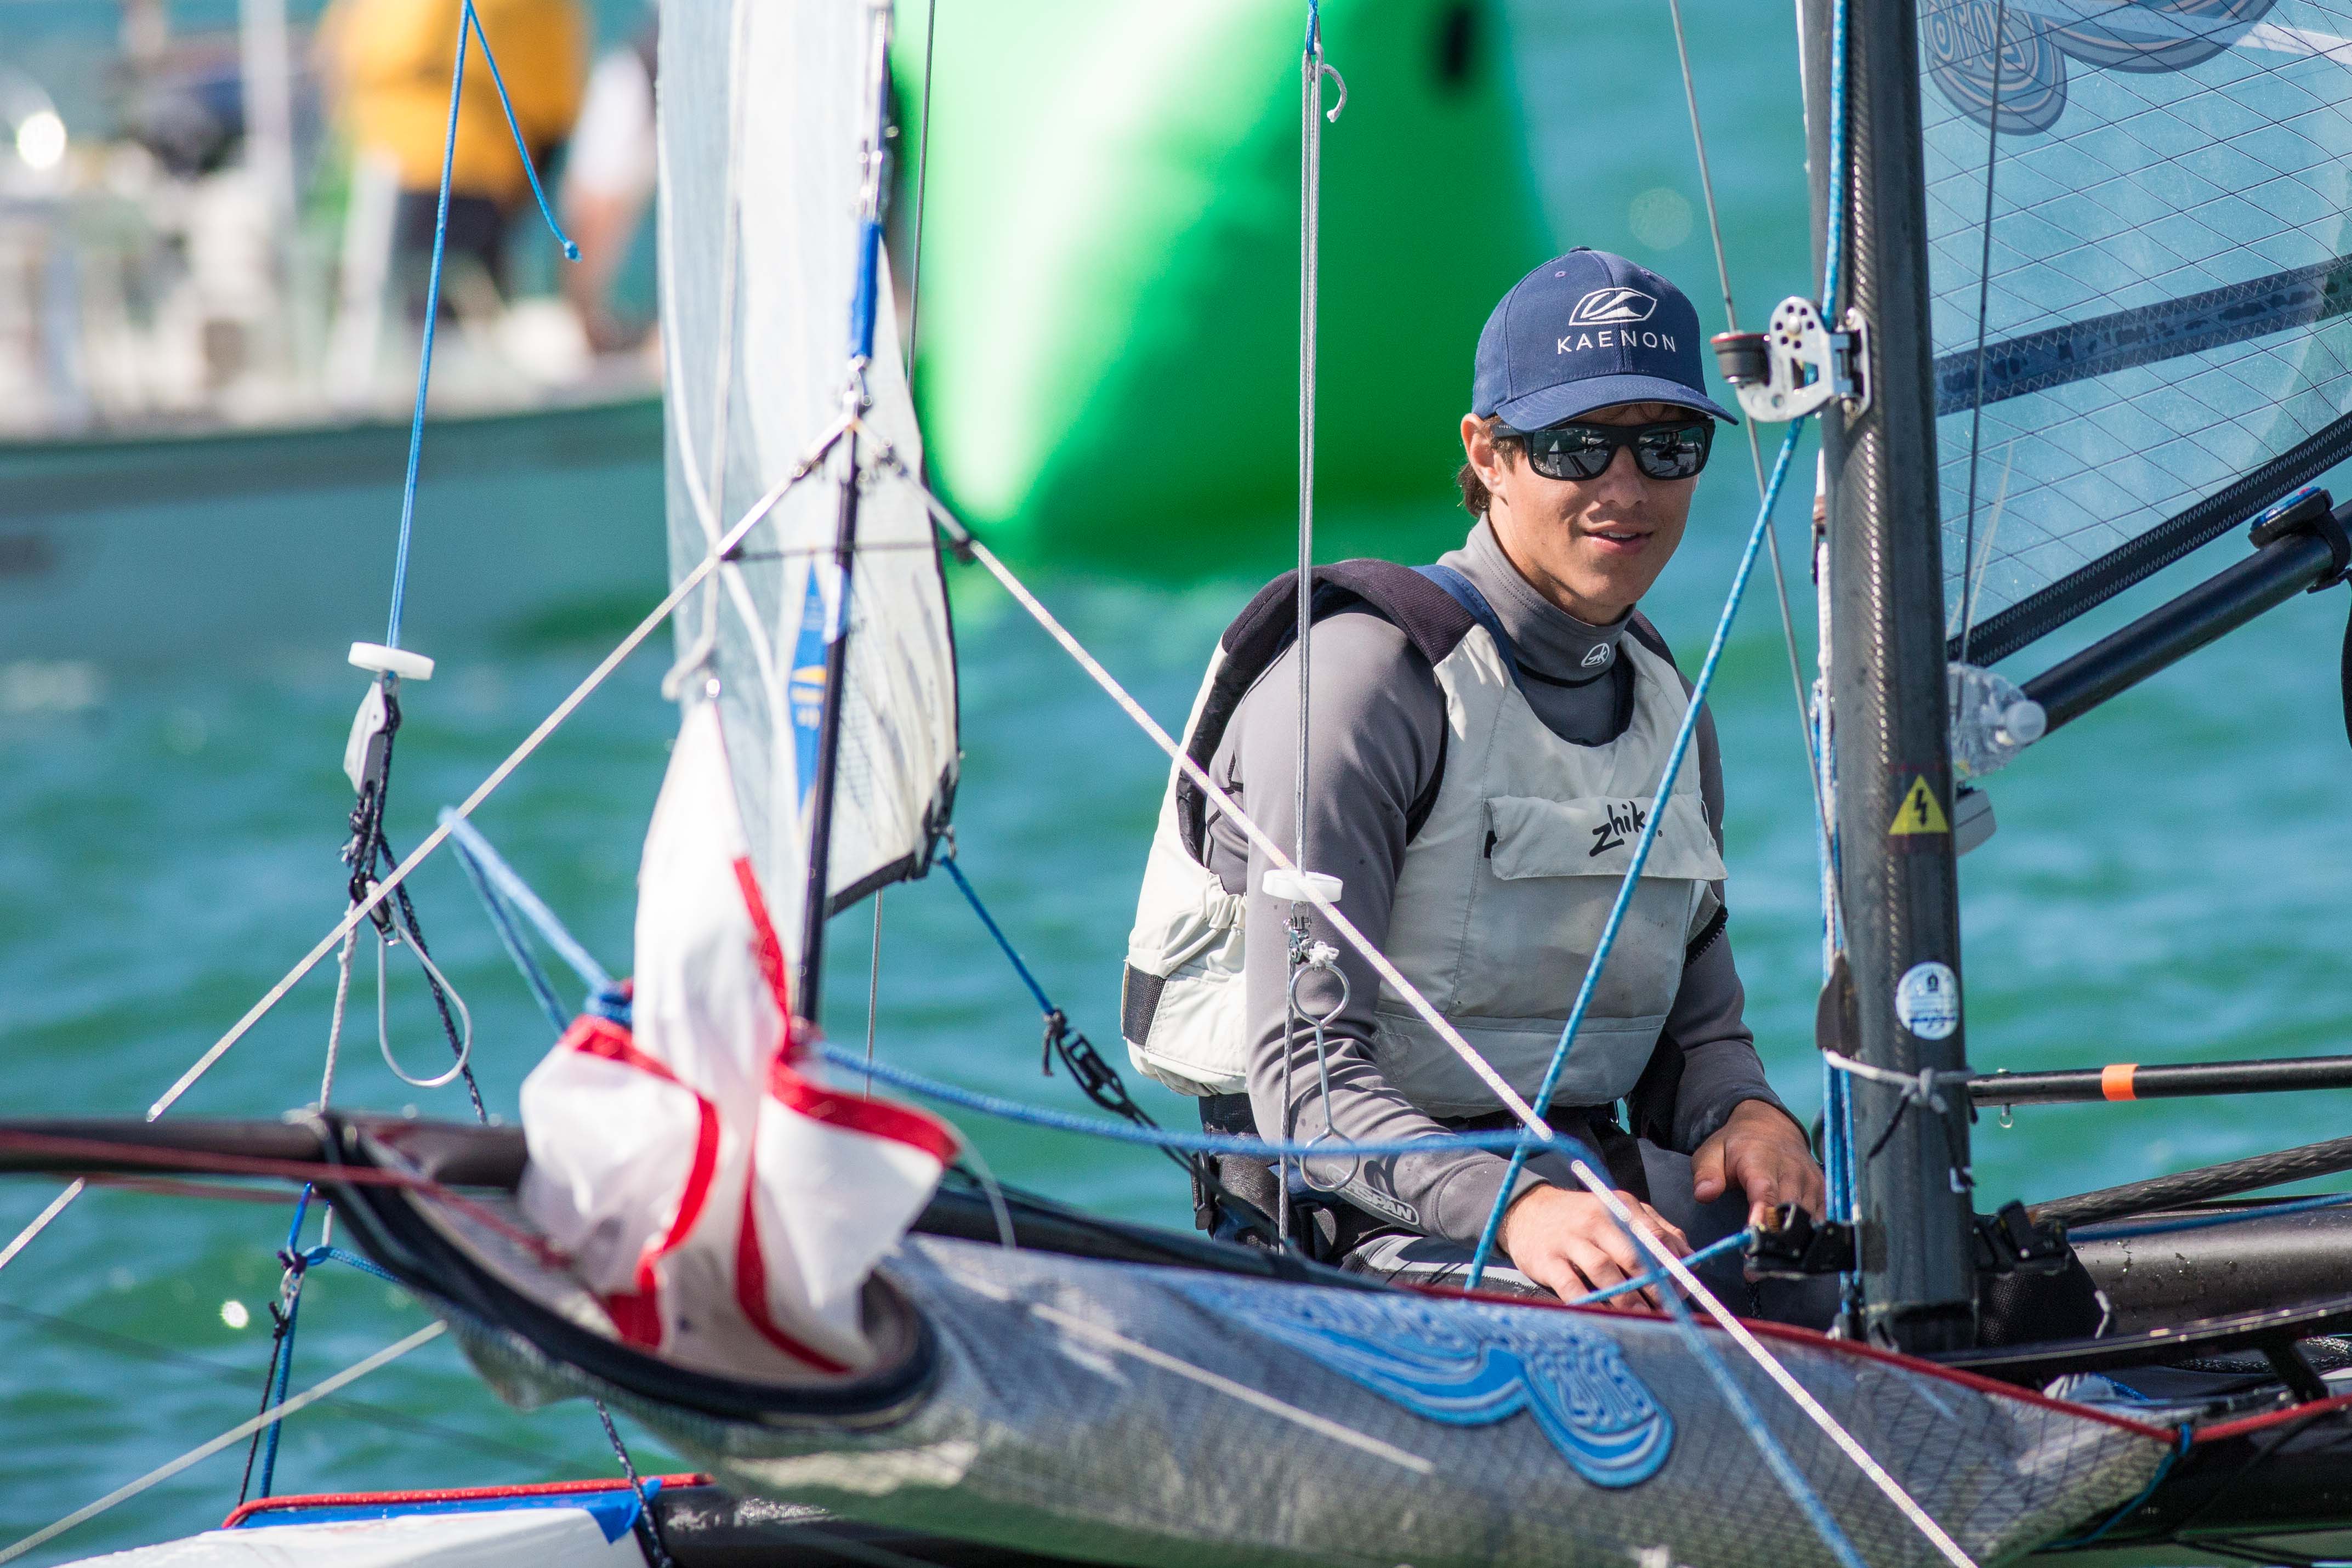 Display Your Brand At The Olympic Sailing Trials